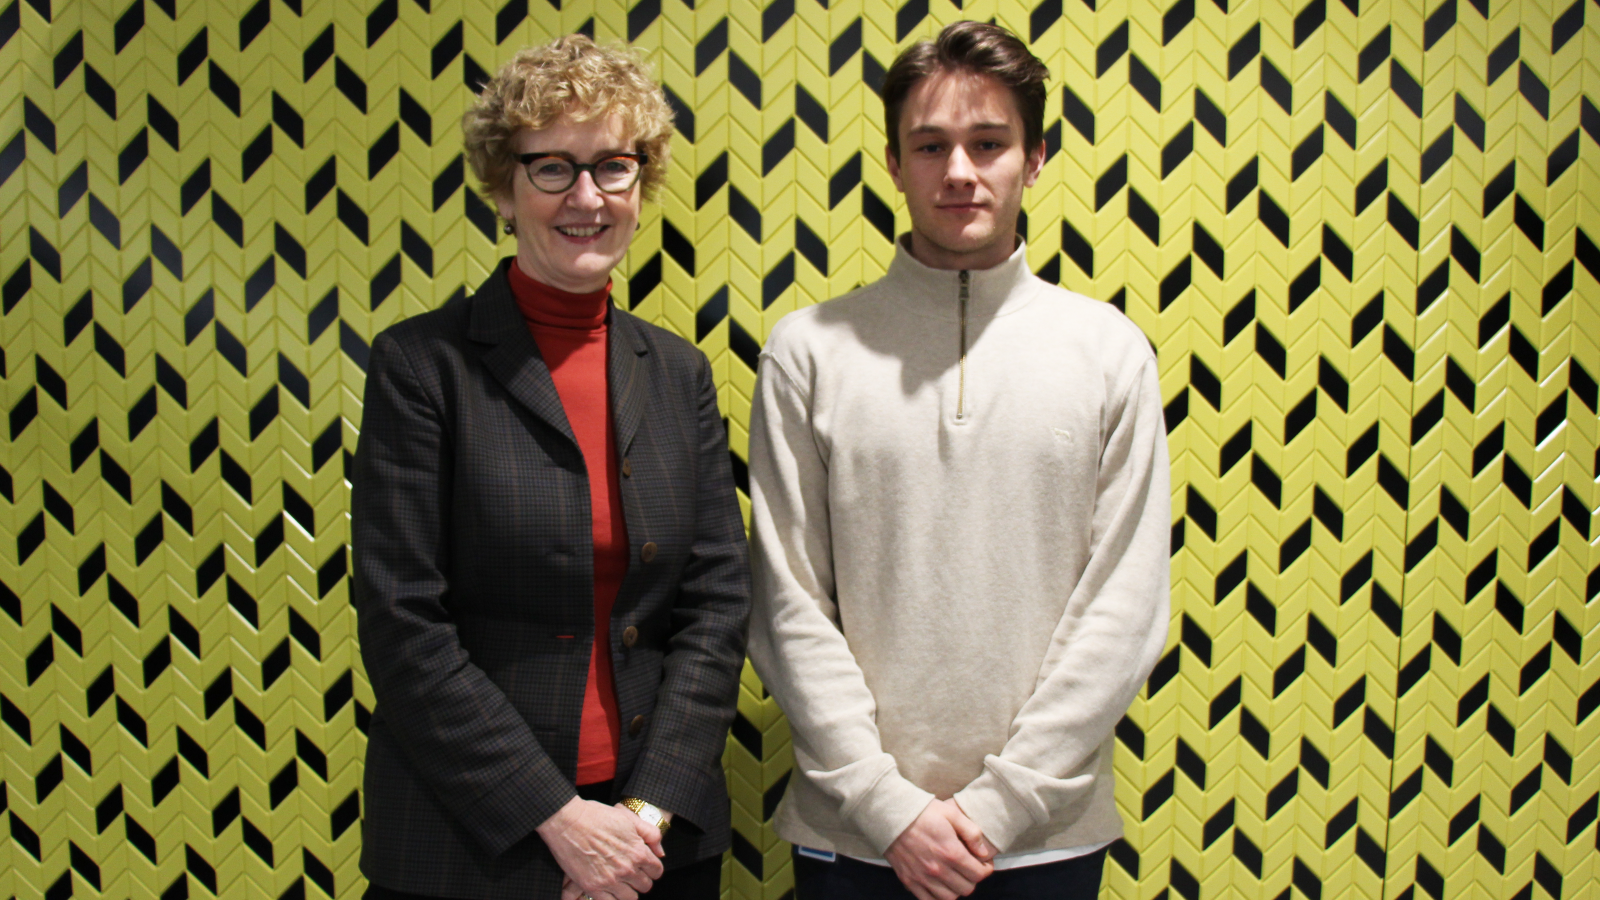 Professor Jane Bryson and Sam Dobbs stand together in front of yellow patterned wall.